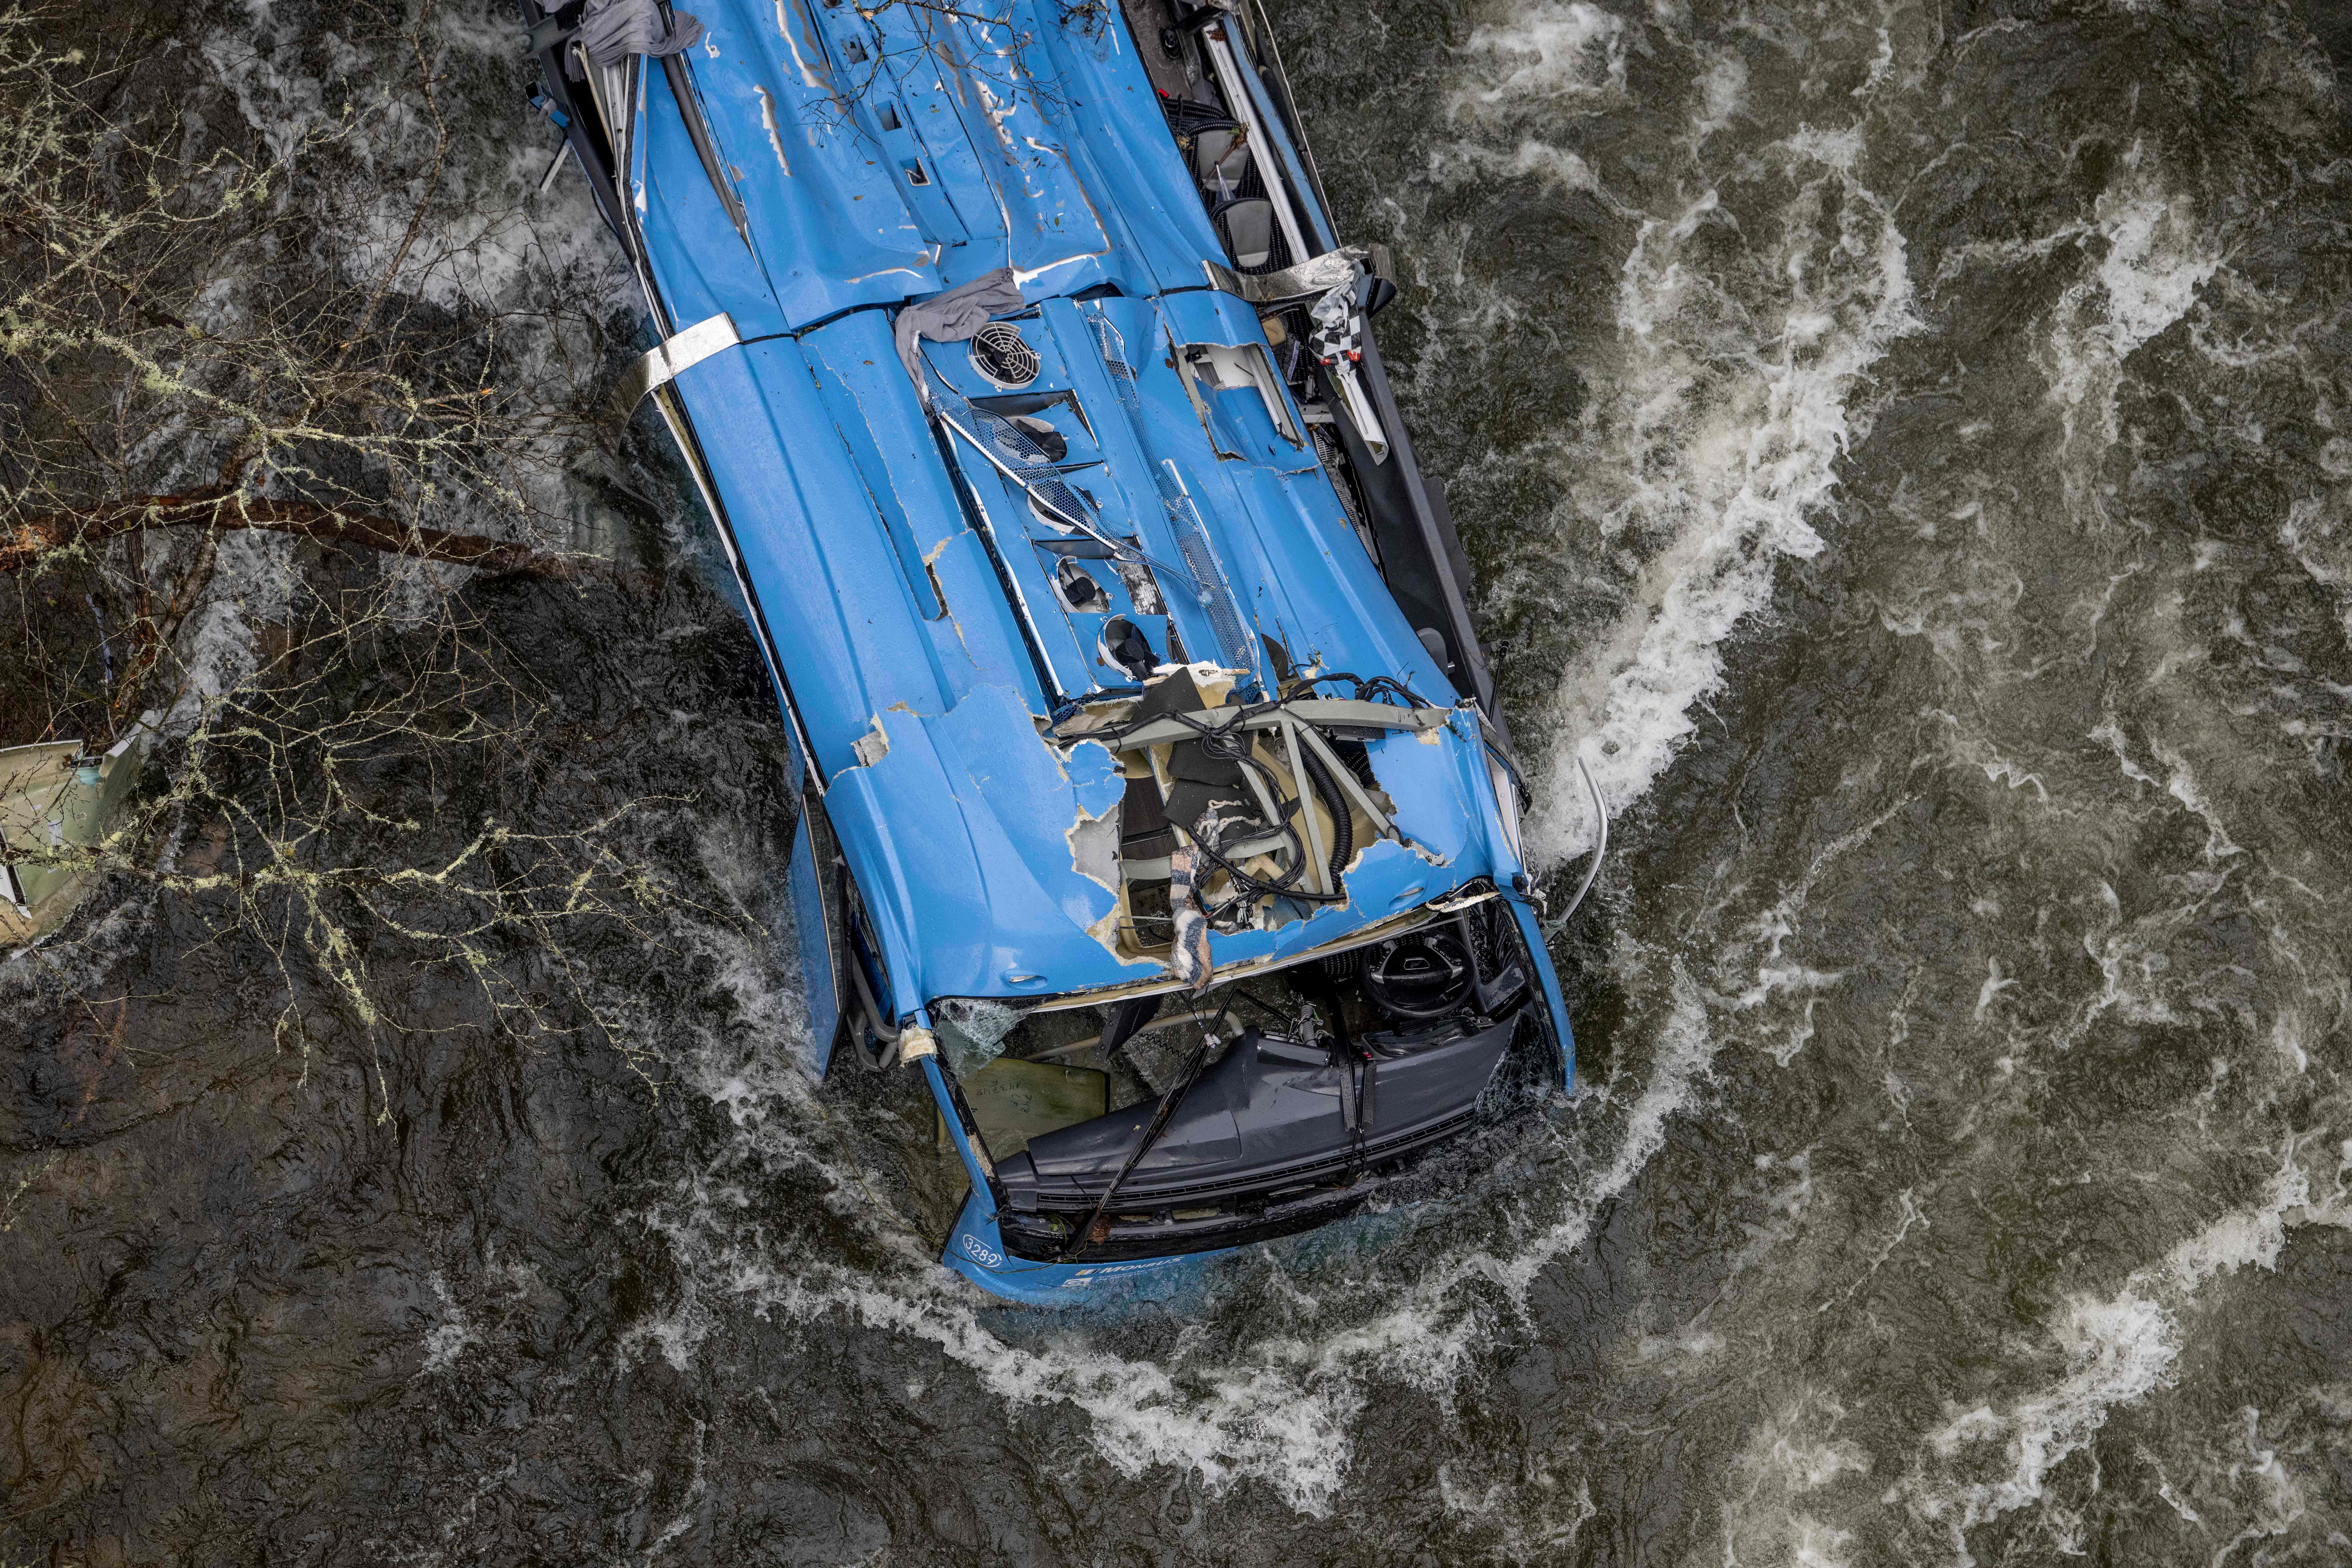 Six dead in northwest Spain when a bus fell from a bridge into a river